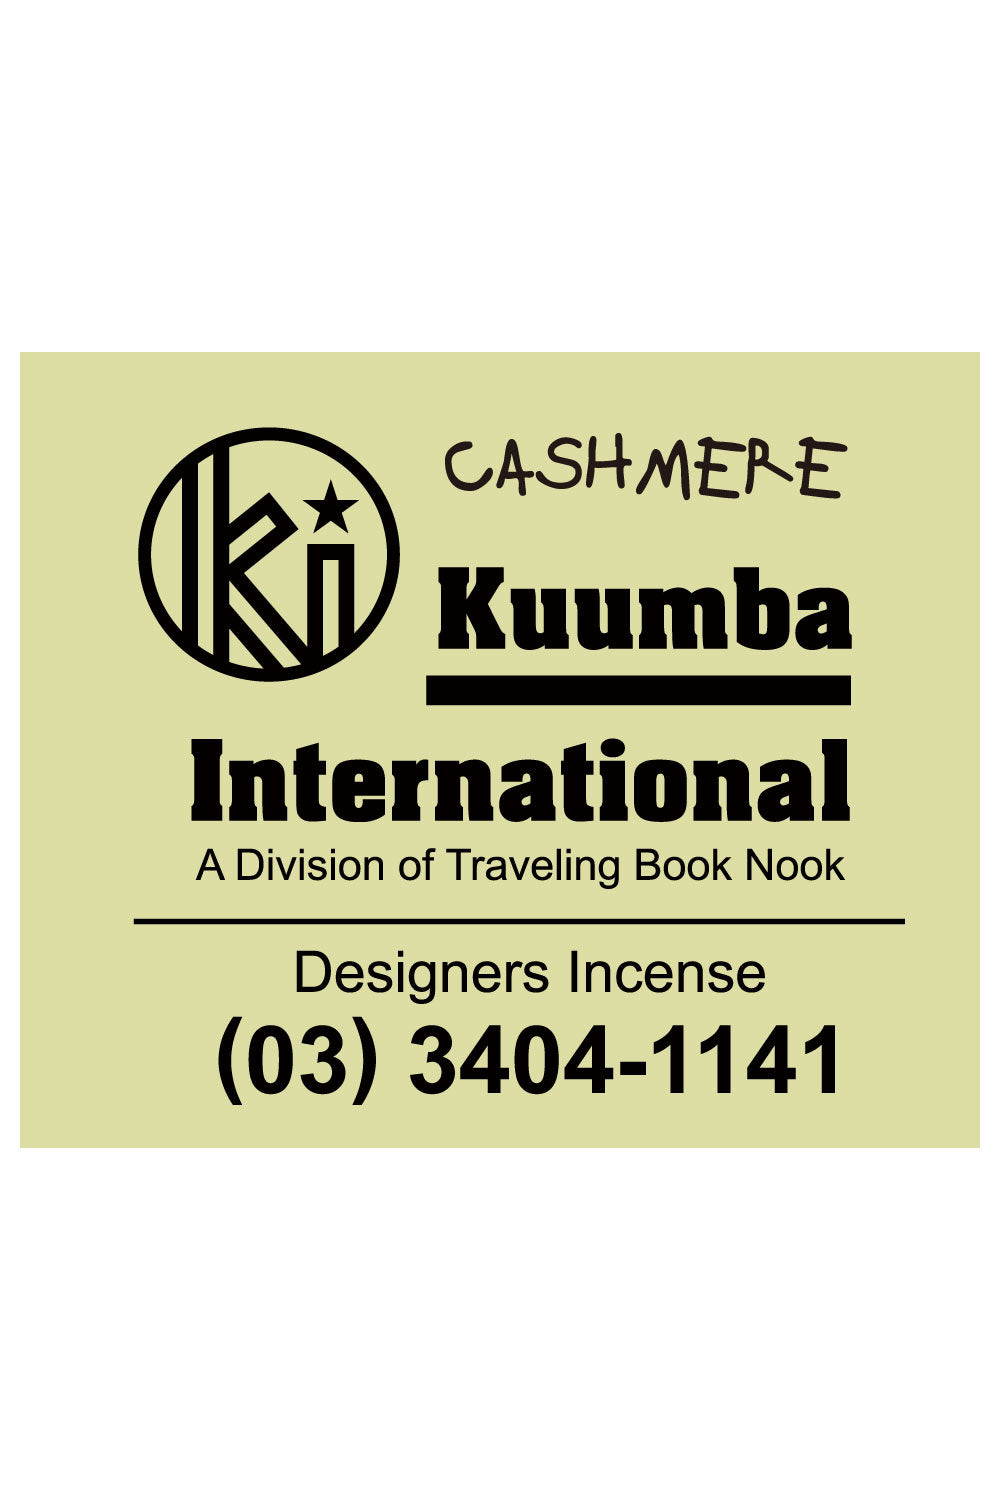 The KUUMBA - DESIGNERS INCENSE CASHMERE available online with global shipping, and in PAM Stores Melbourne and Sydney.